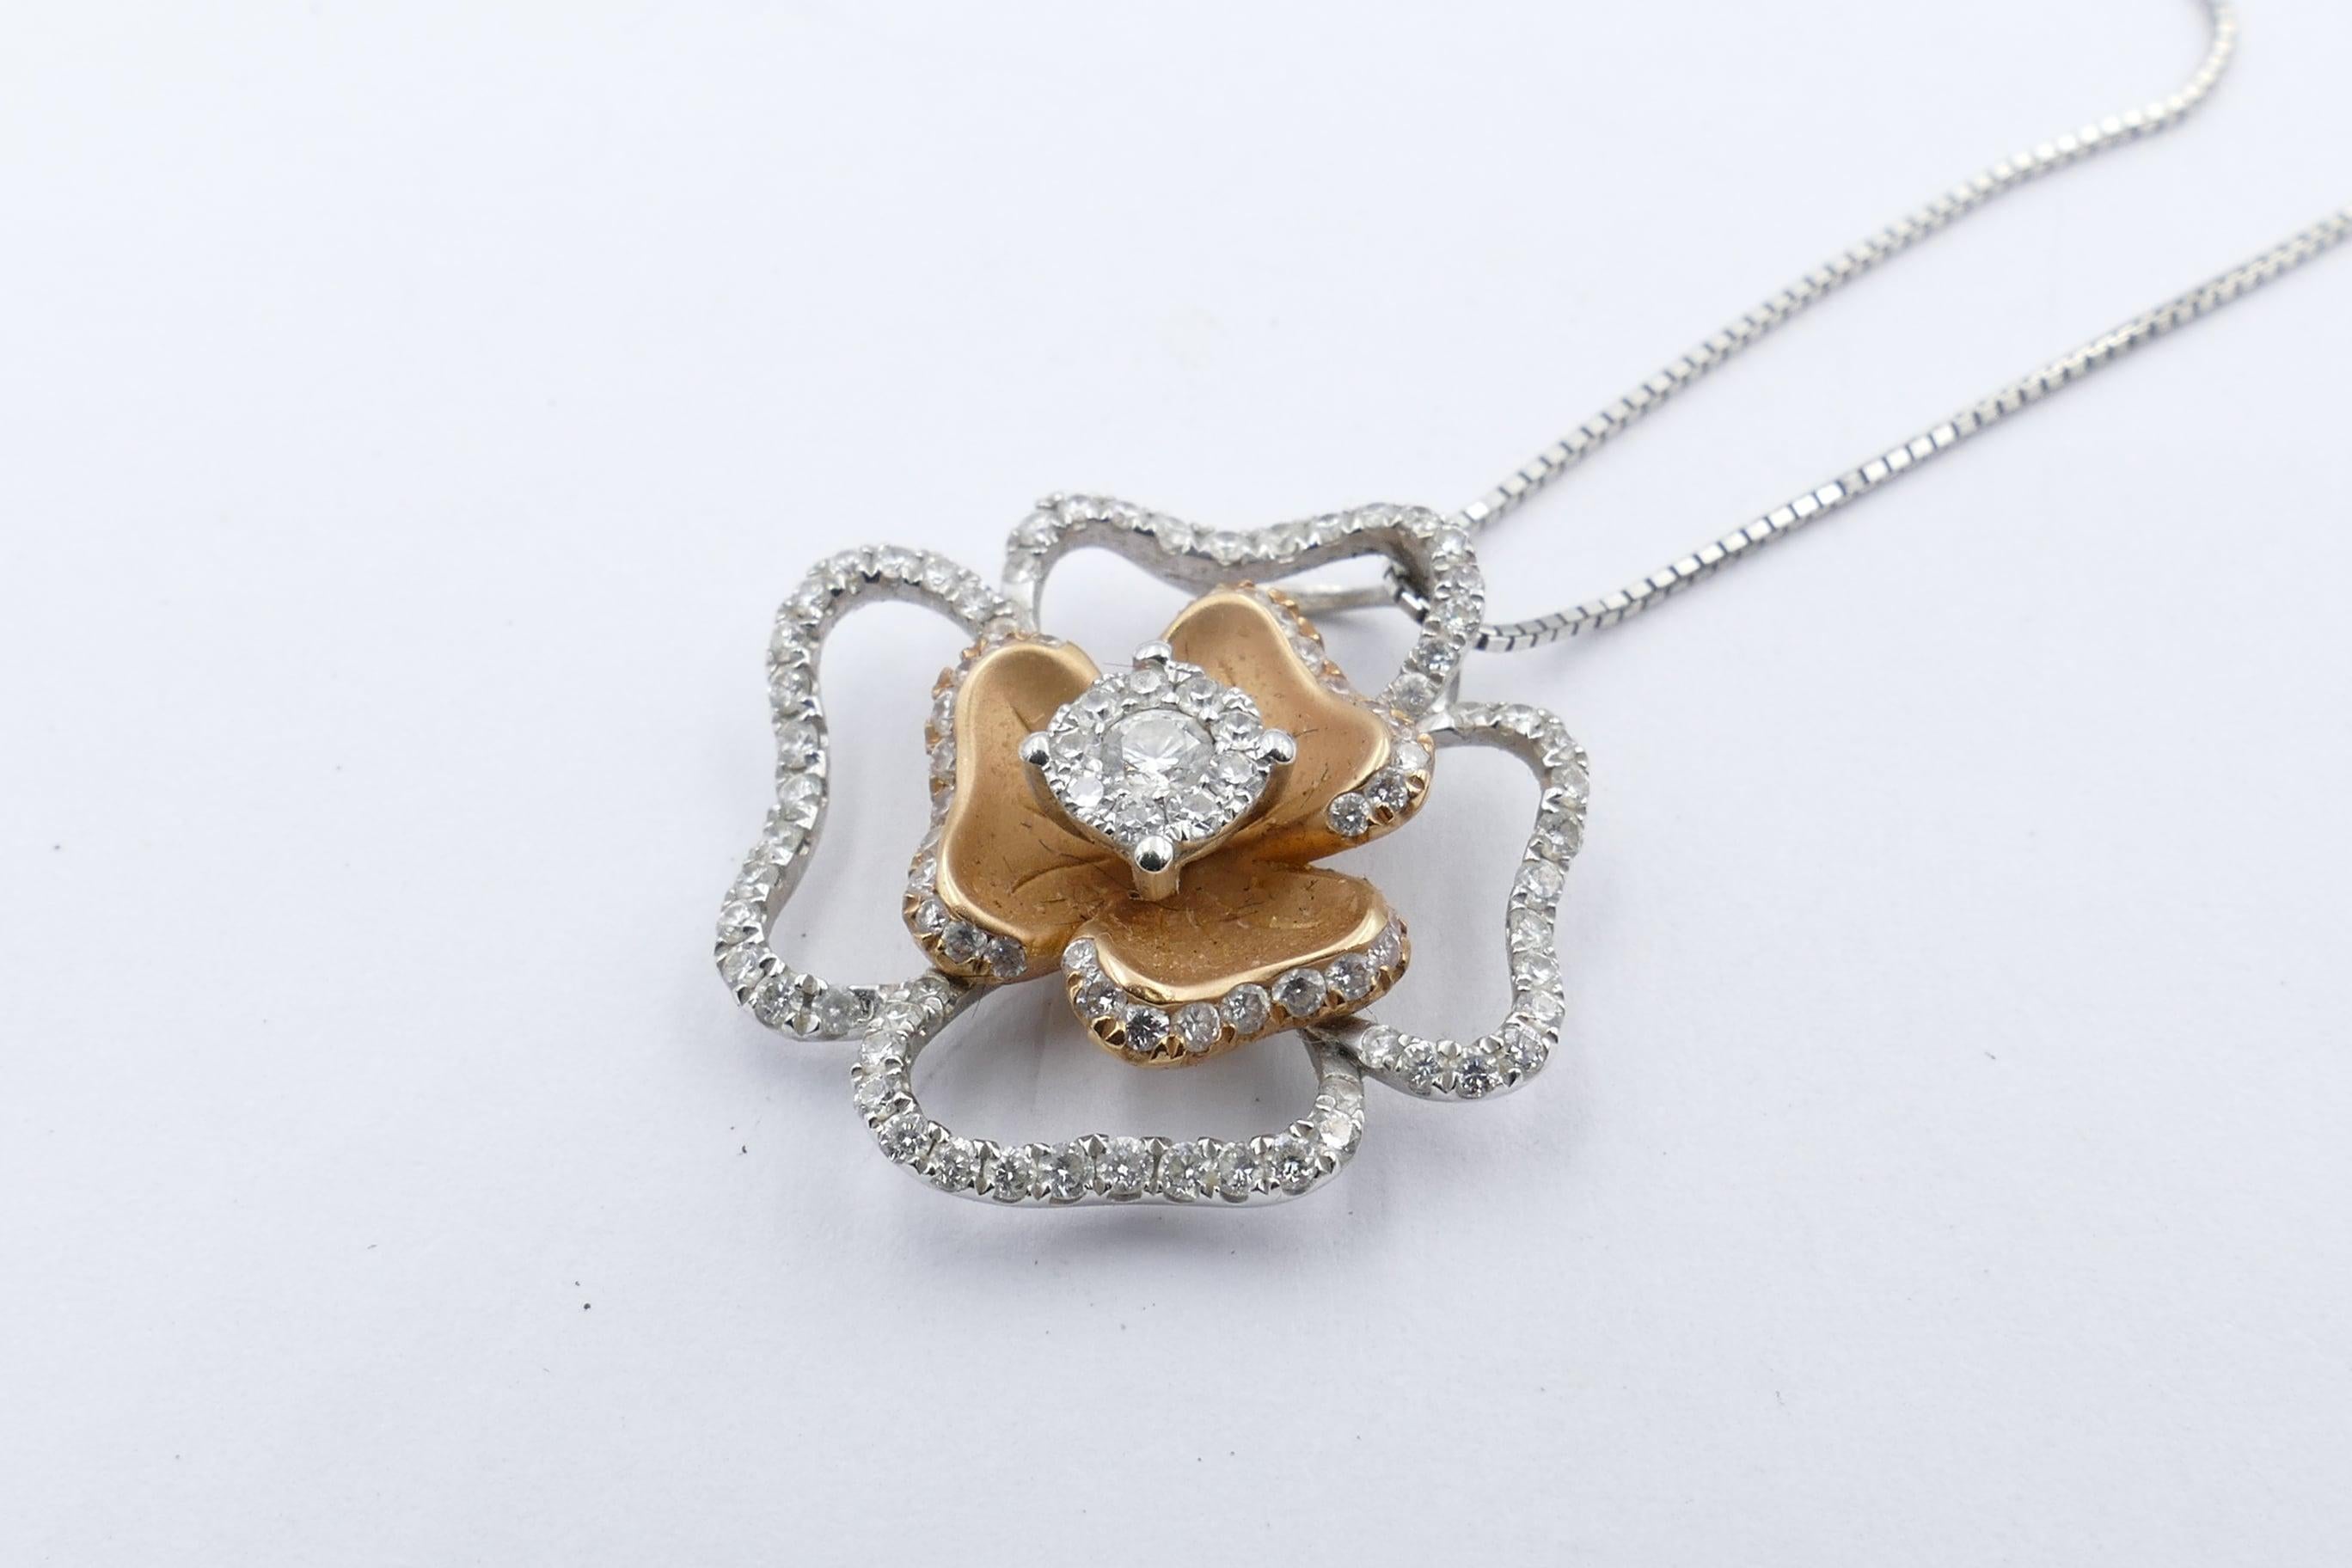 102 high quality Diamonds make up this very wearable Flower Pendant Necklace. 
Diamond grade is G with Clarity VS.
And there are just on 1 Karat of Diamonds.
Total Diamond weight 0.92K
Total Item weight 5.3 grams
Method of  Manufacture - Hand